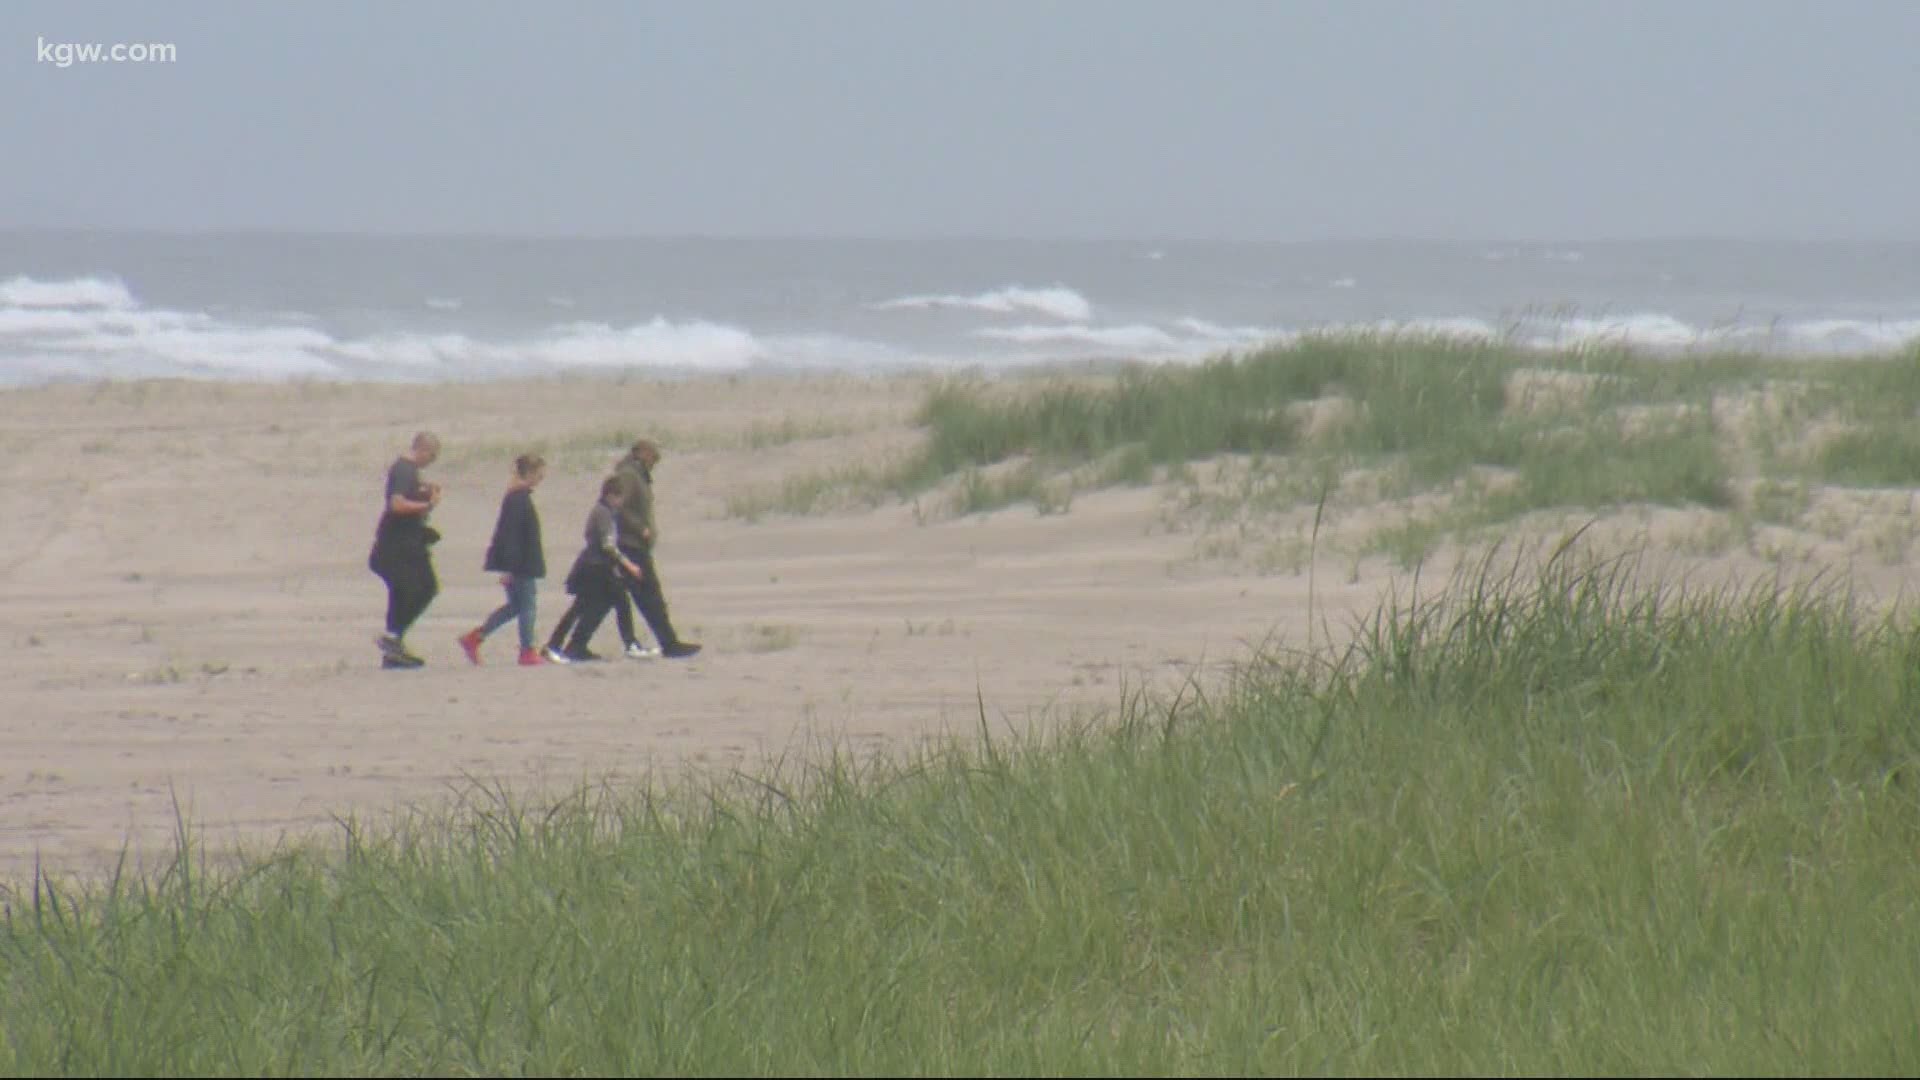 People anxious to visit Oregon’s beaches got their first chance Monday, as many access points reopened.